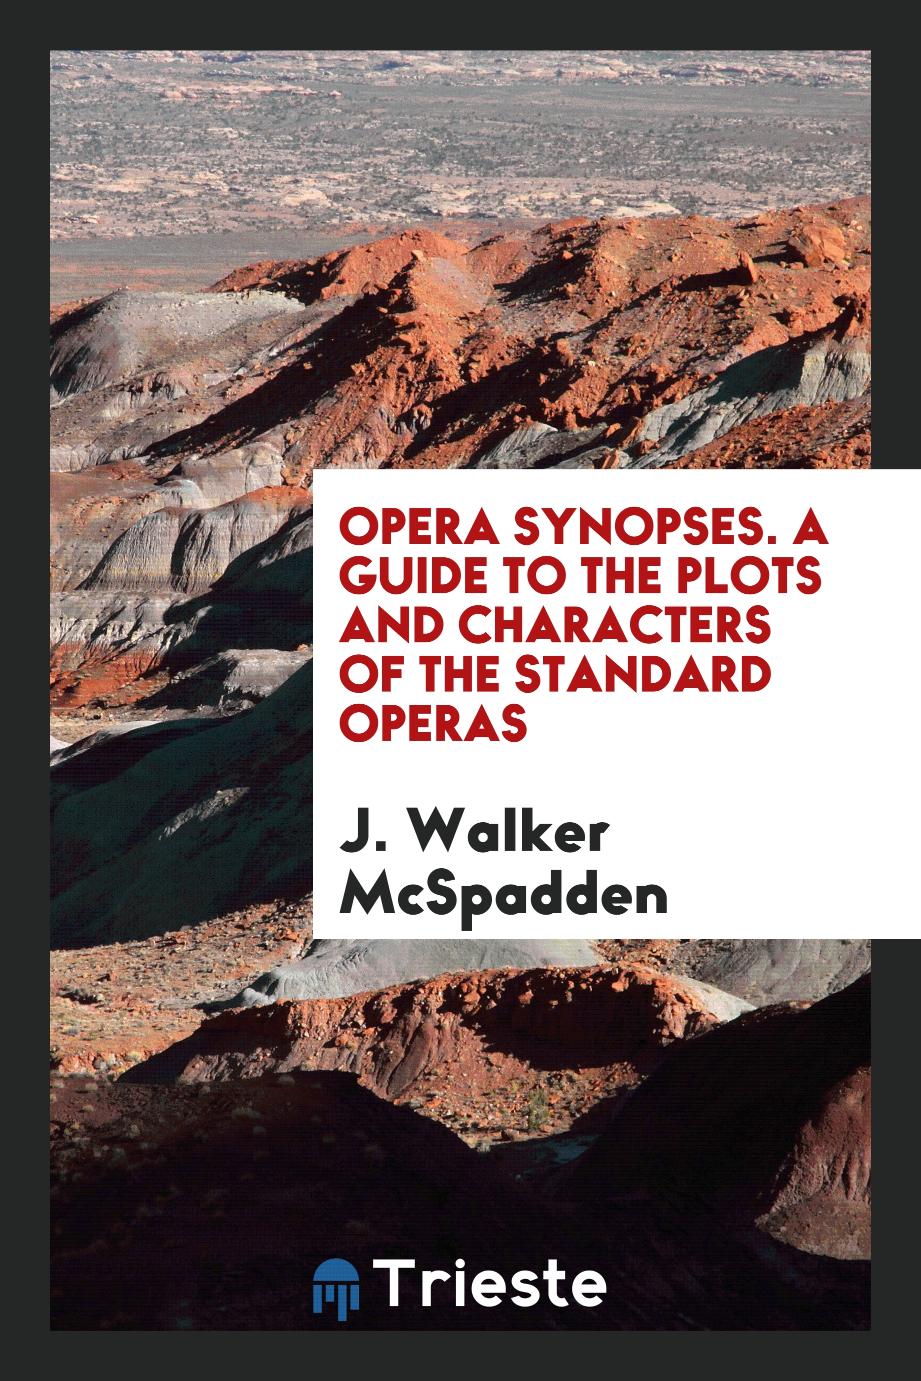 Opera Synopses. A Guide to the Plots and Characters of the Standard Operas